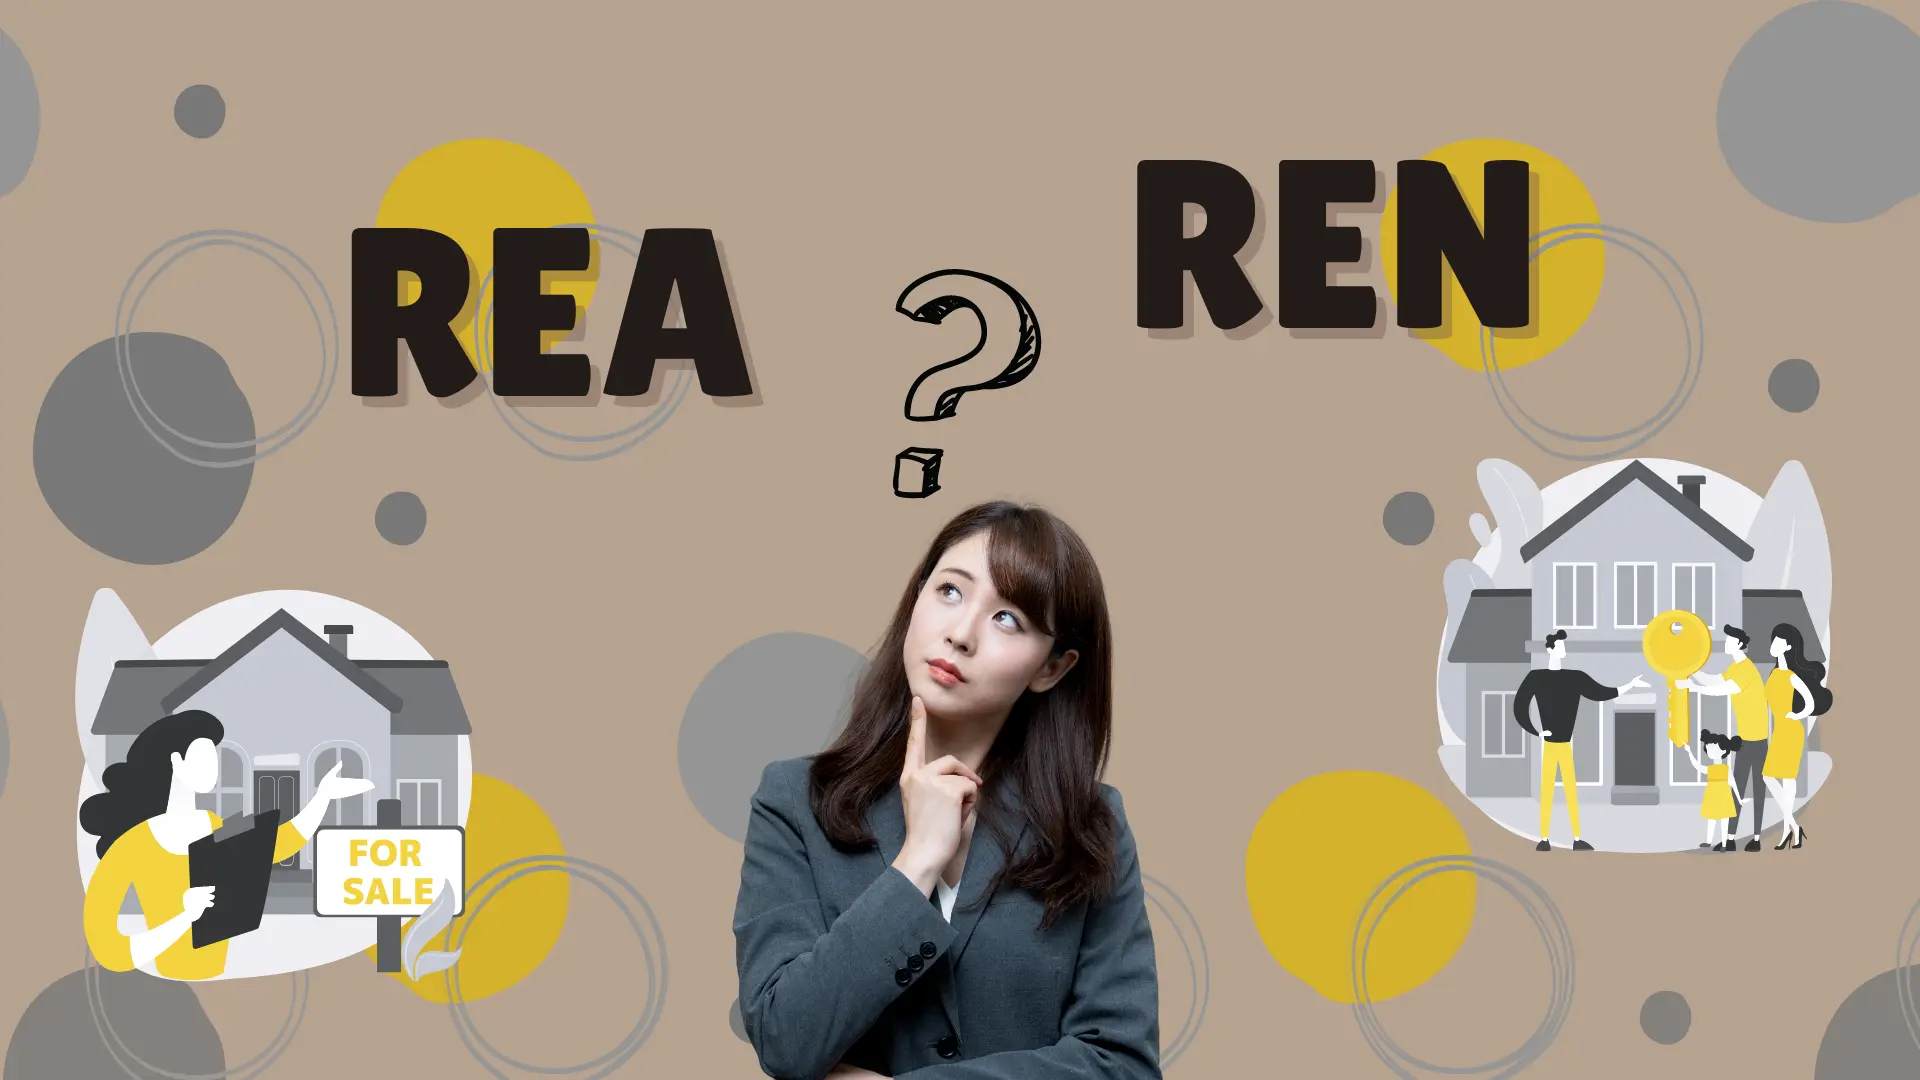 REA and REN are not the same